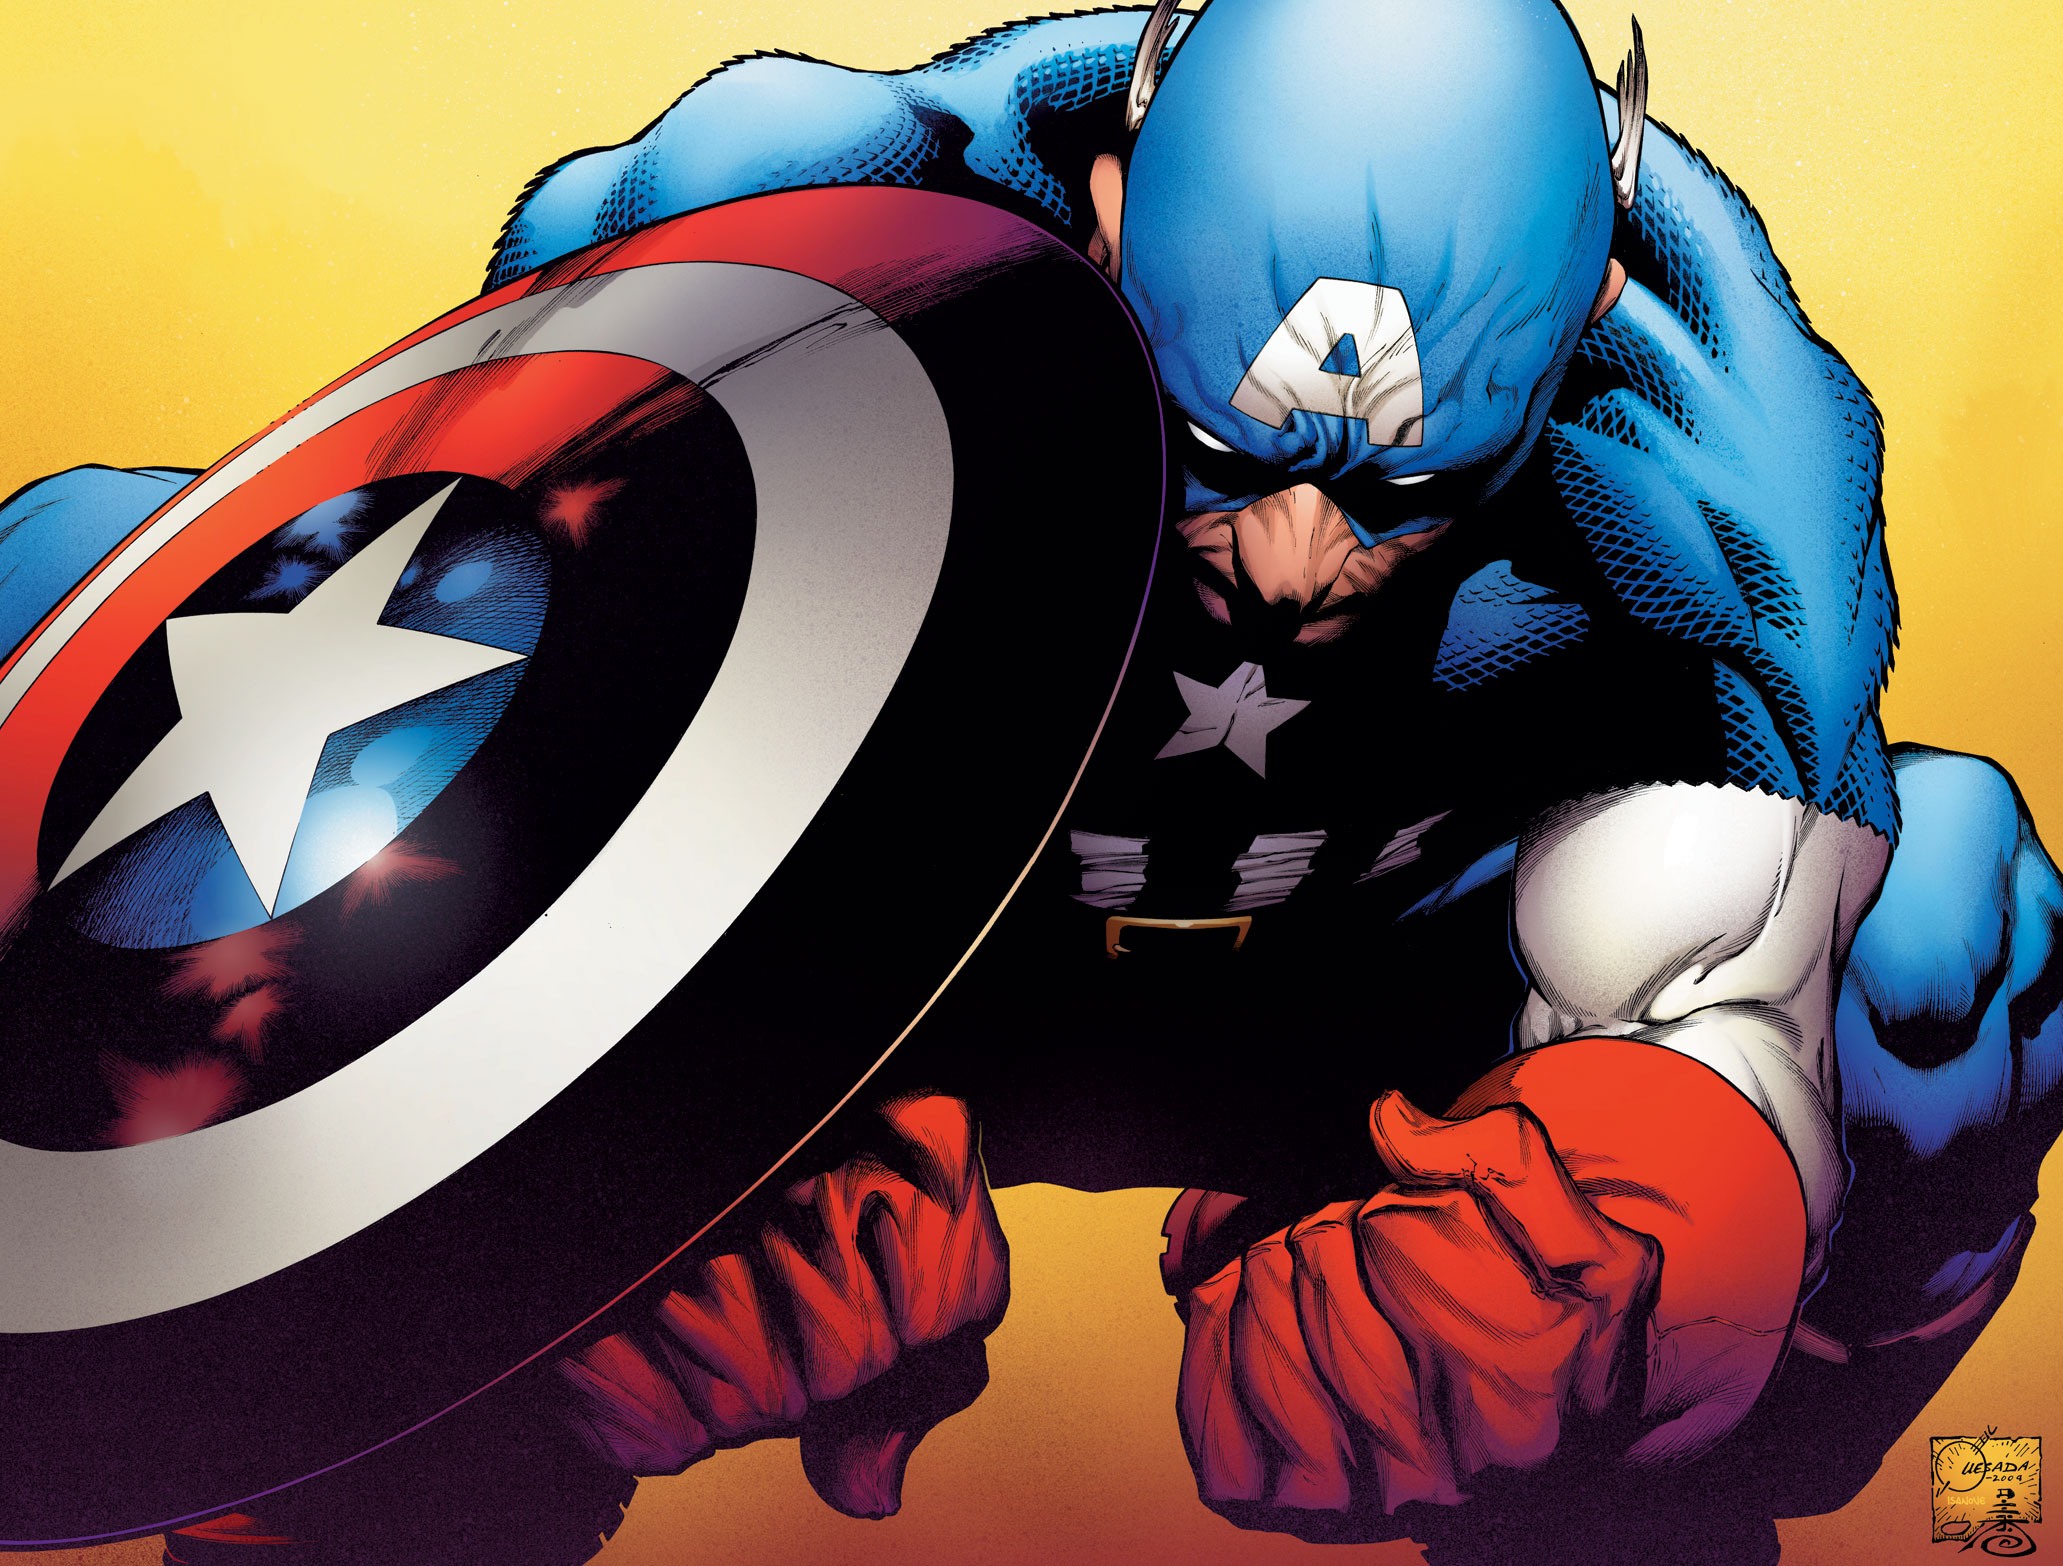 This Image was ranked 28 by Bingcom for keyword captain america